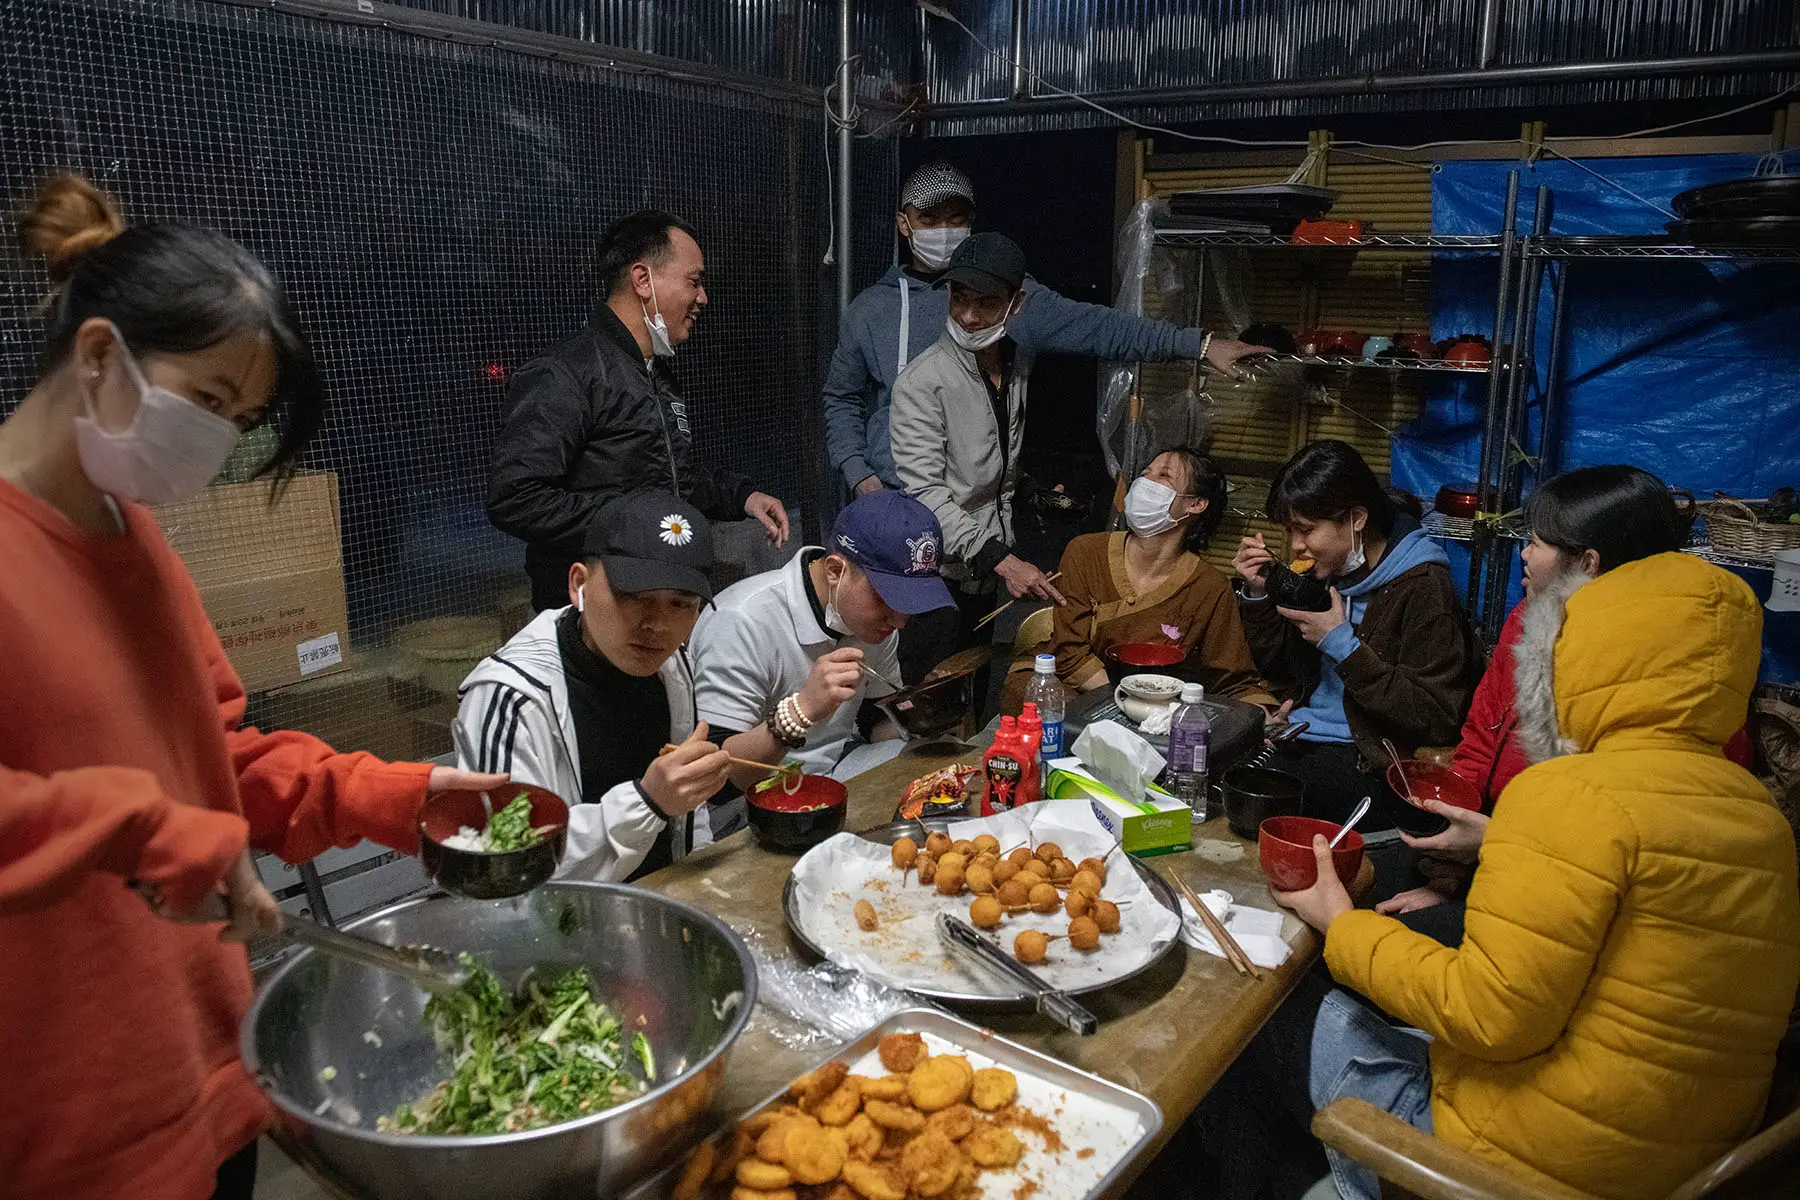 Vietnamese migrant workers made jobless and homeless by the coronavirus pandemic enjoy dinner together.